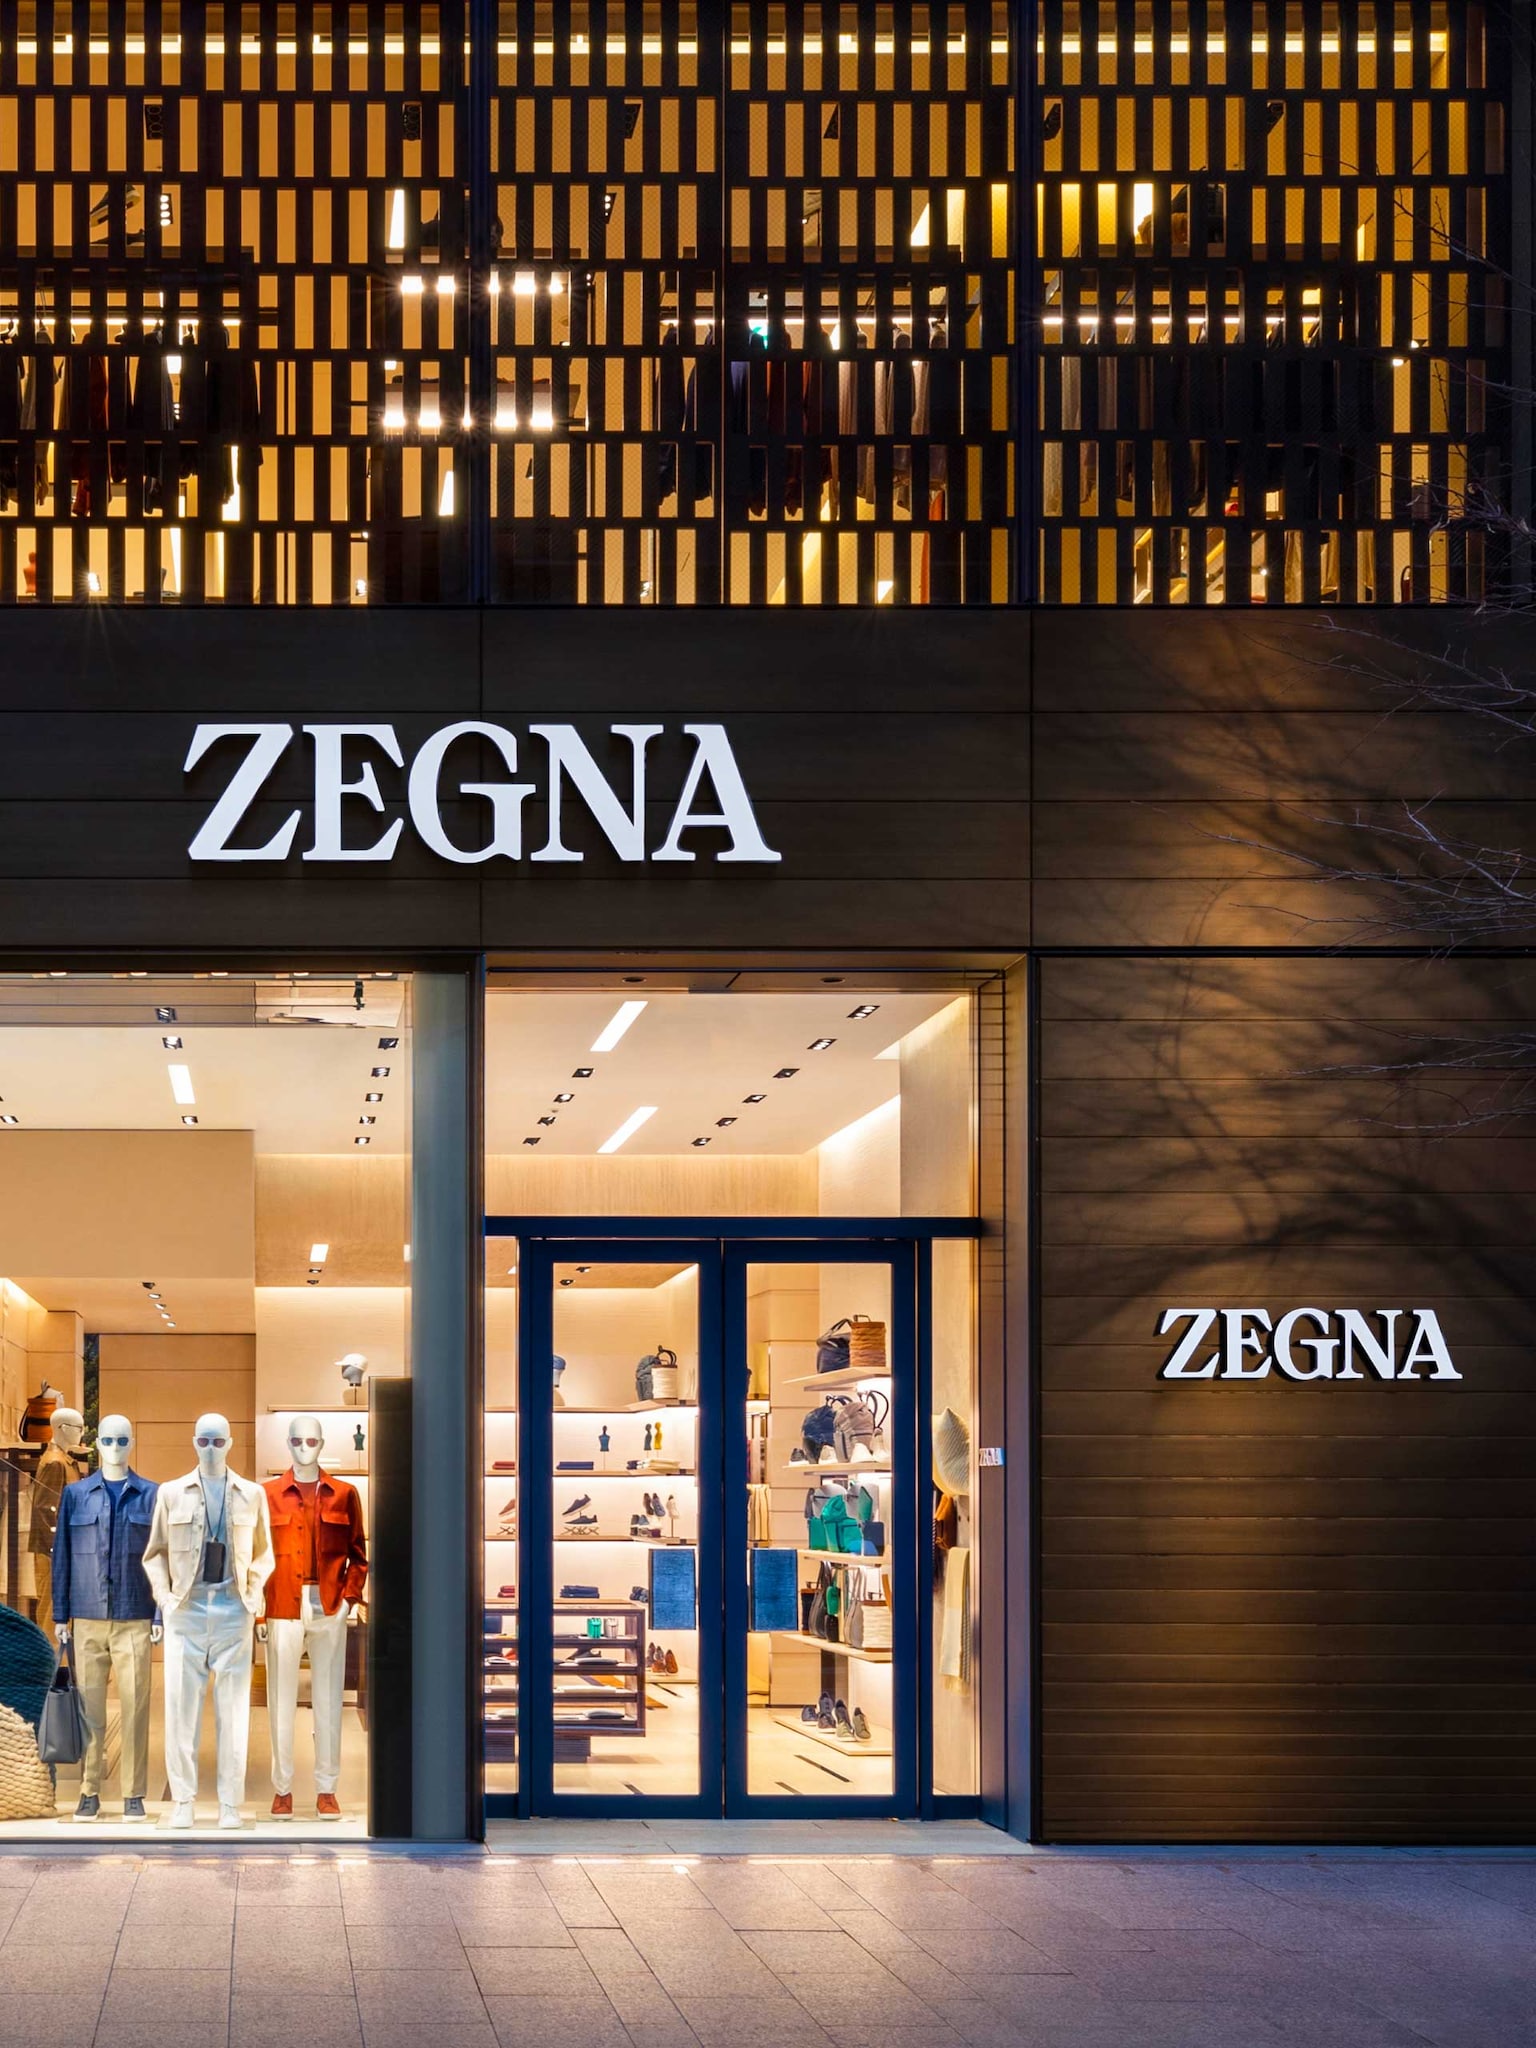 40.Zegna opens a new flagship store in Ginza